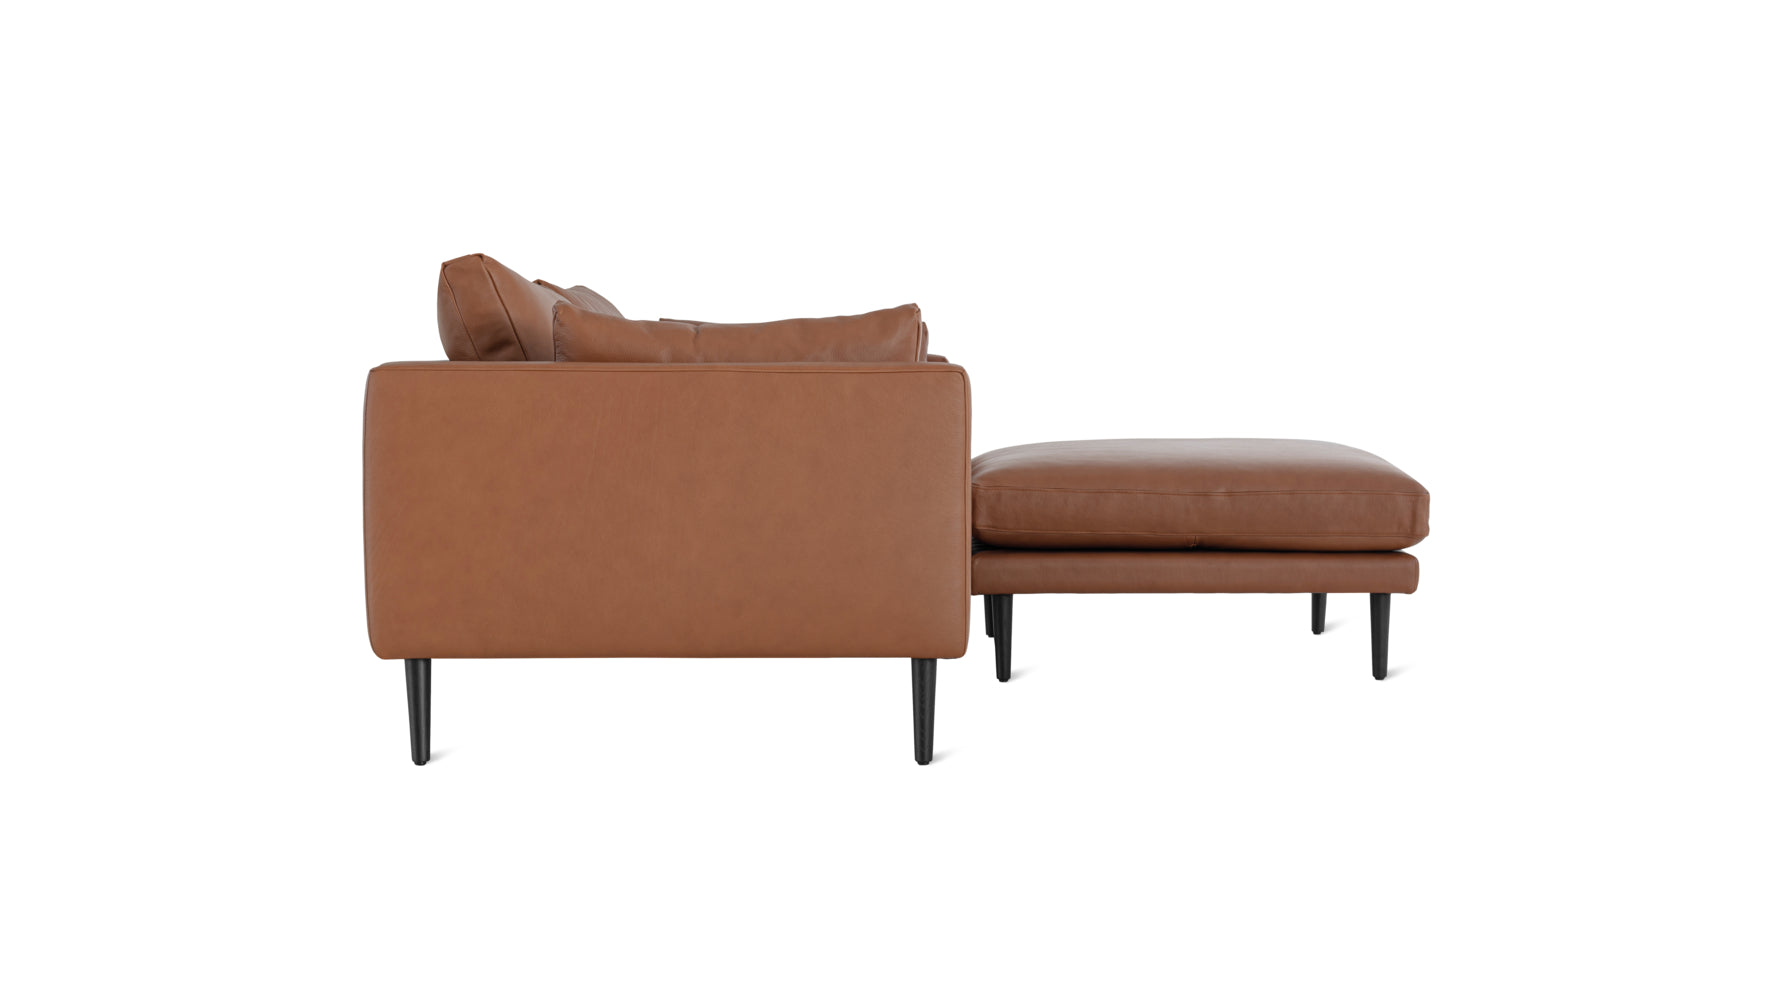 Stay A While Sectional, 2.5 Seater, Cigar - Image 3